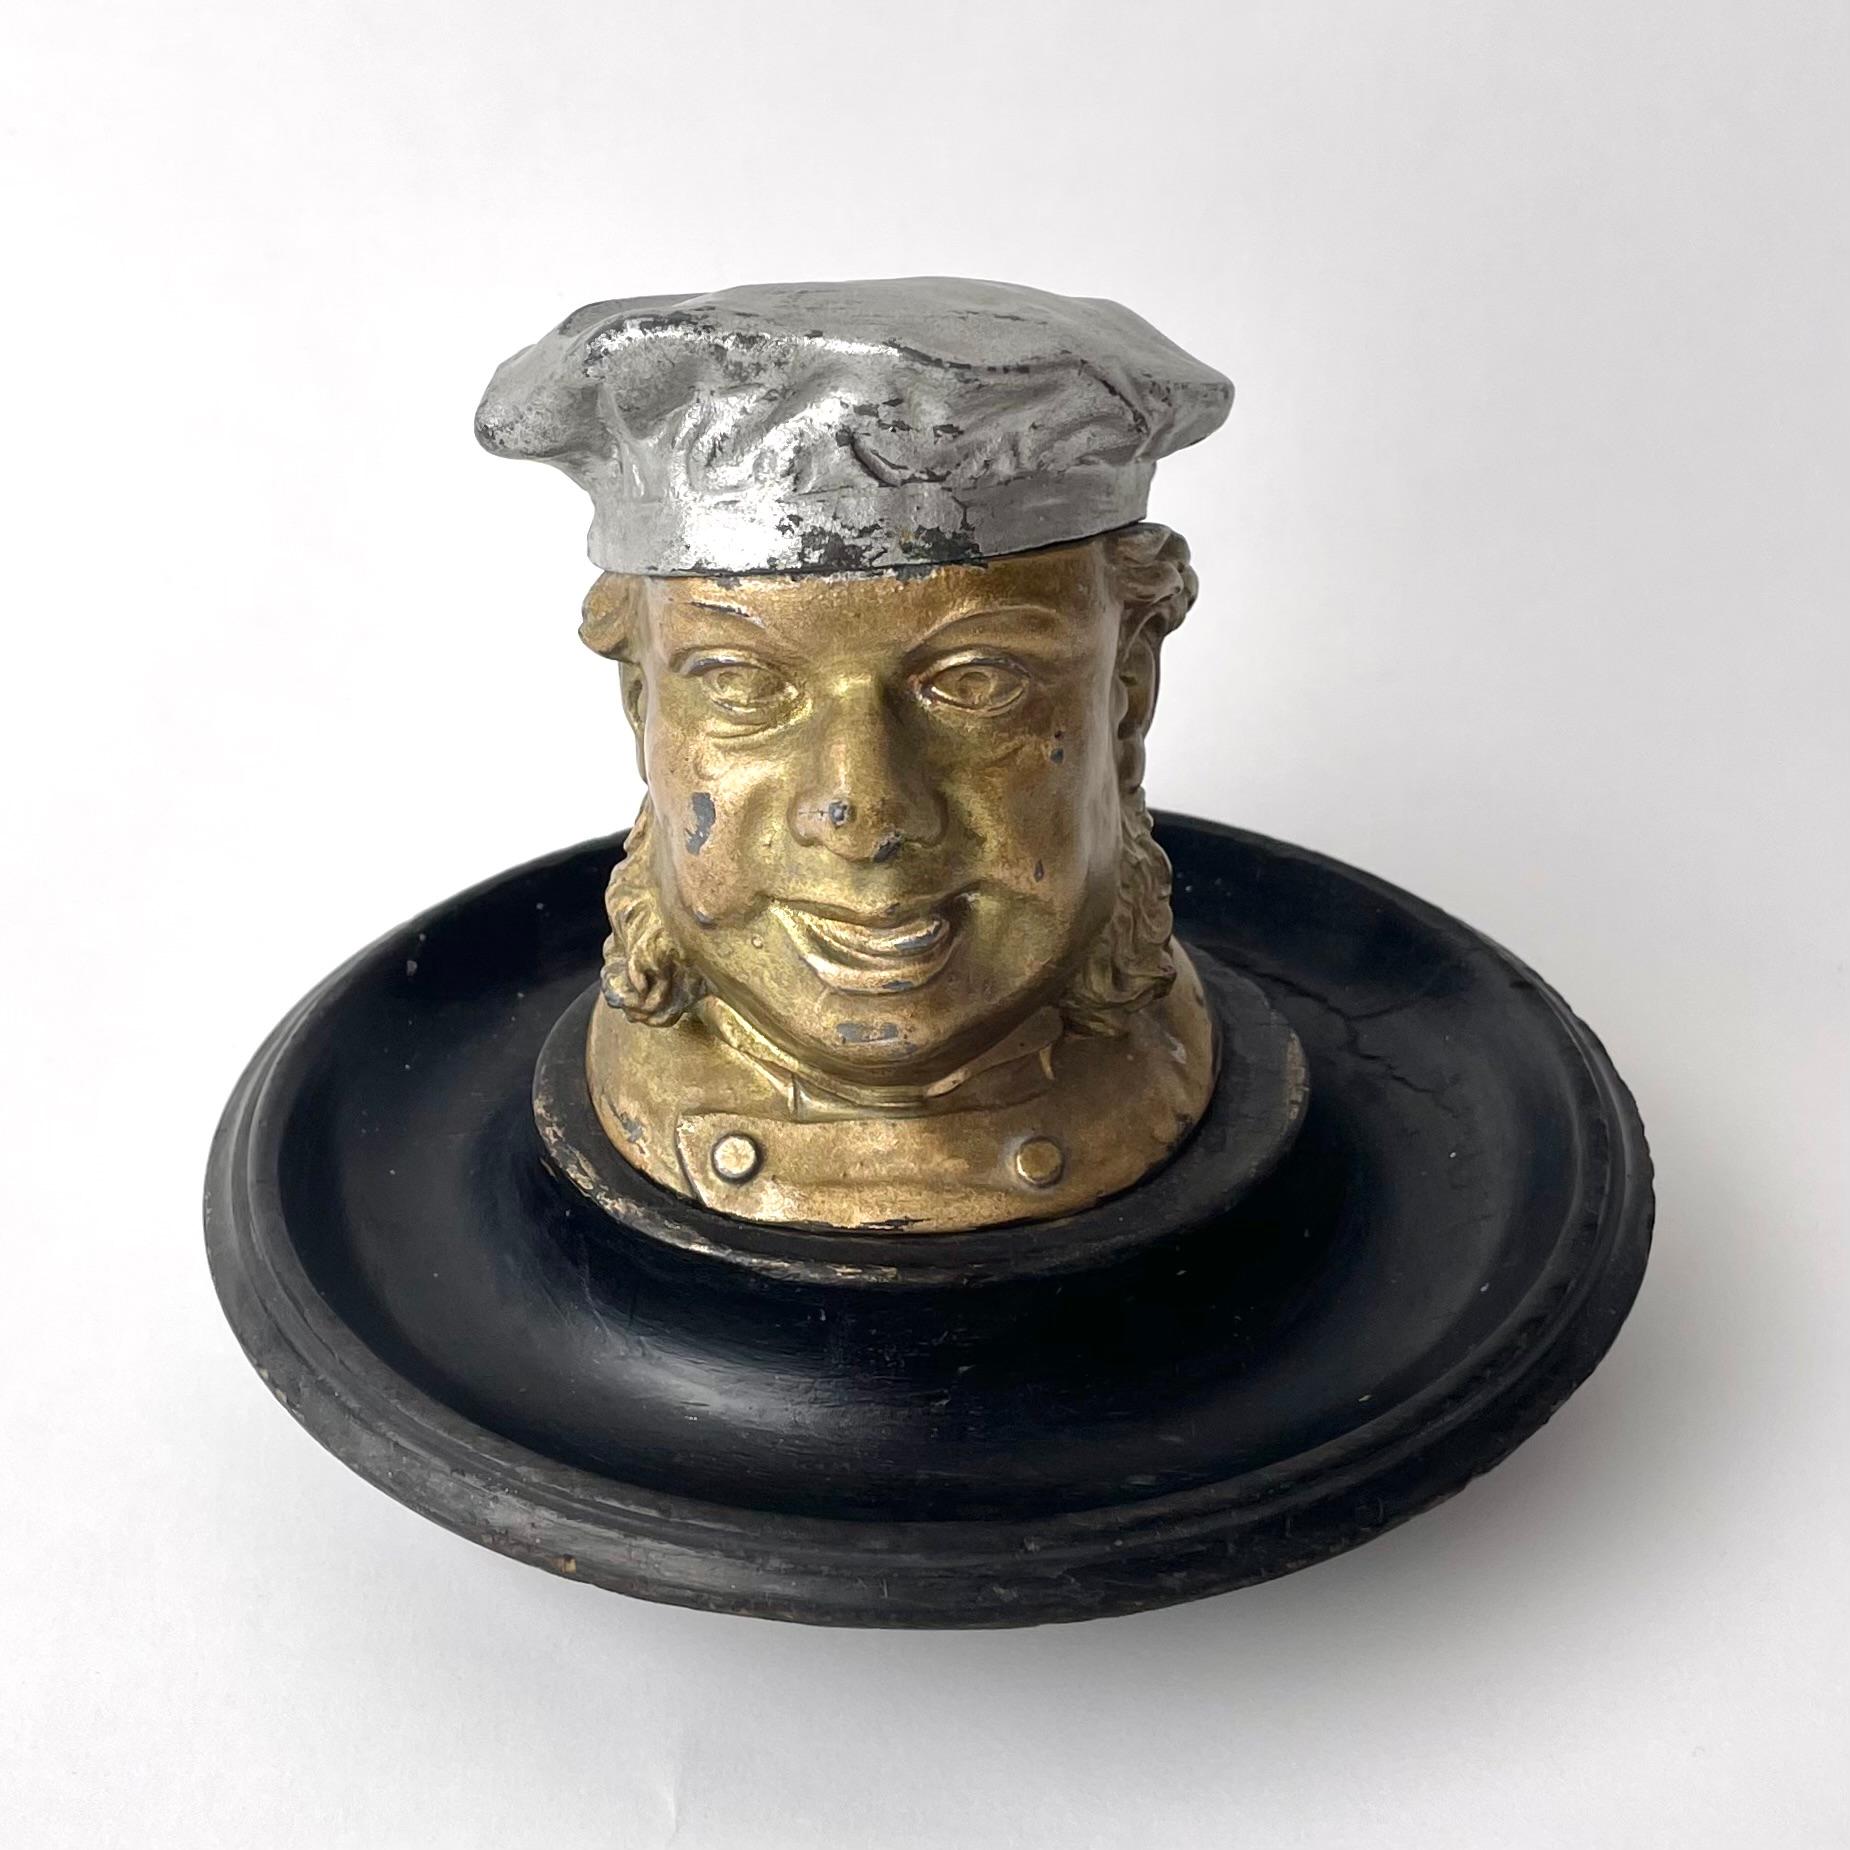 Charming Ink Well/Inkstand in the shape of man's head, painted white metal and patinated wood. Made in England during the 19th century.

A simply charming inkstand consists of a a painted wood-turned base upon which is mounted a white metal inkwell